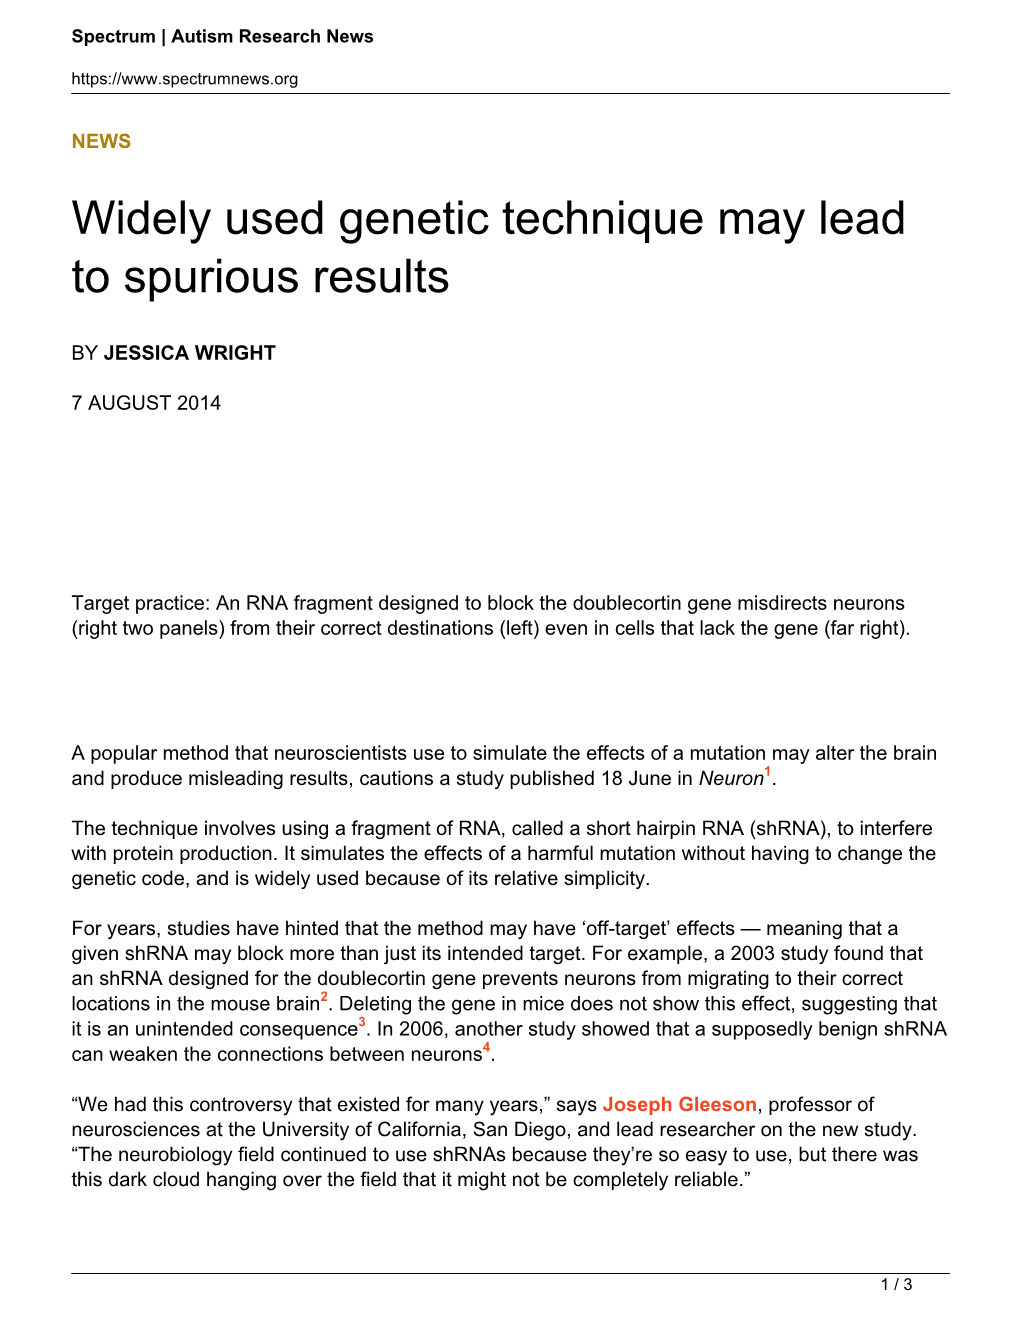 Widely Used Genetic Technique May Lead to Spurious Results